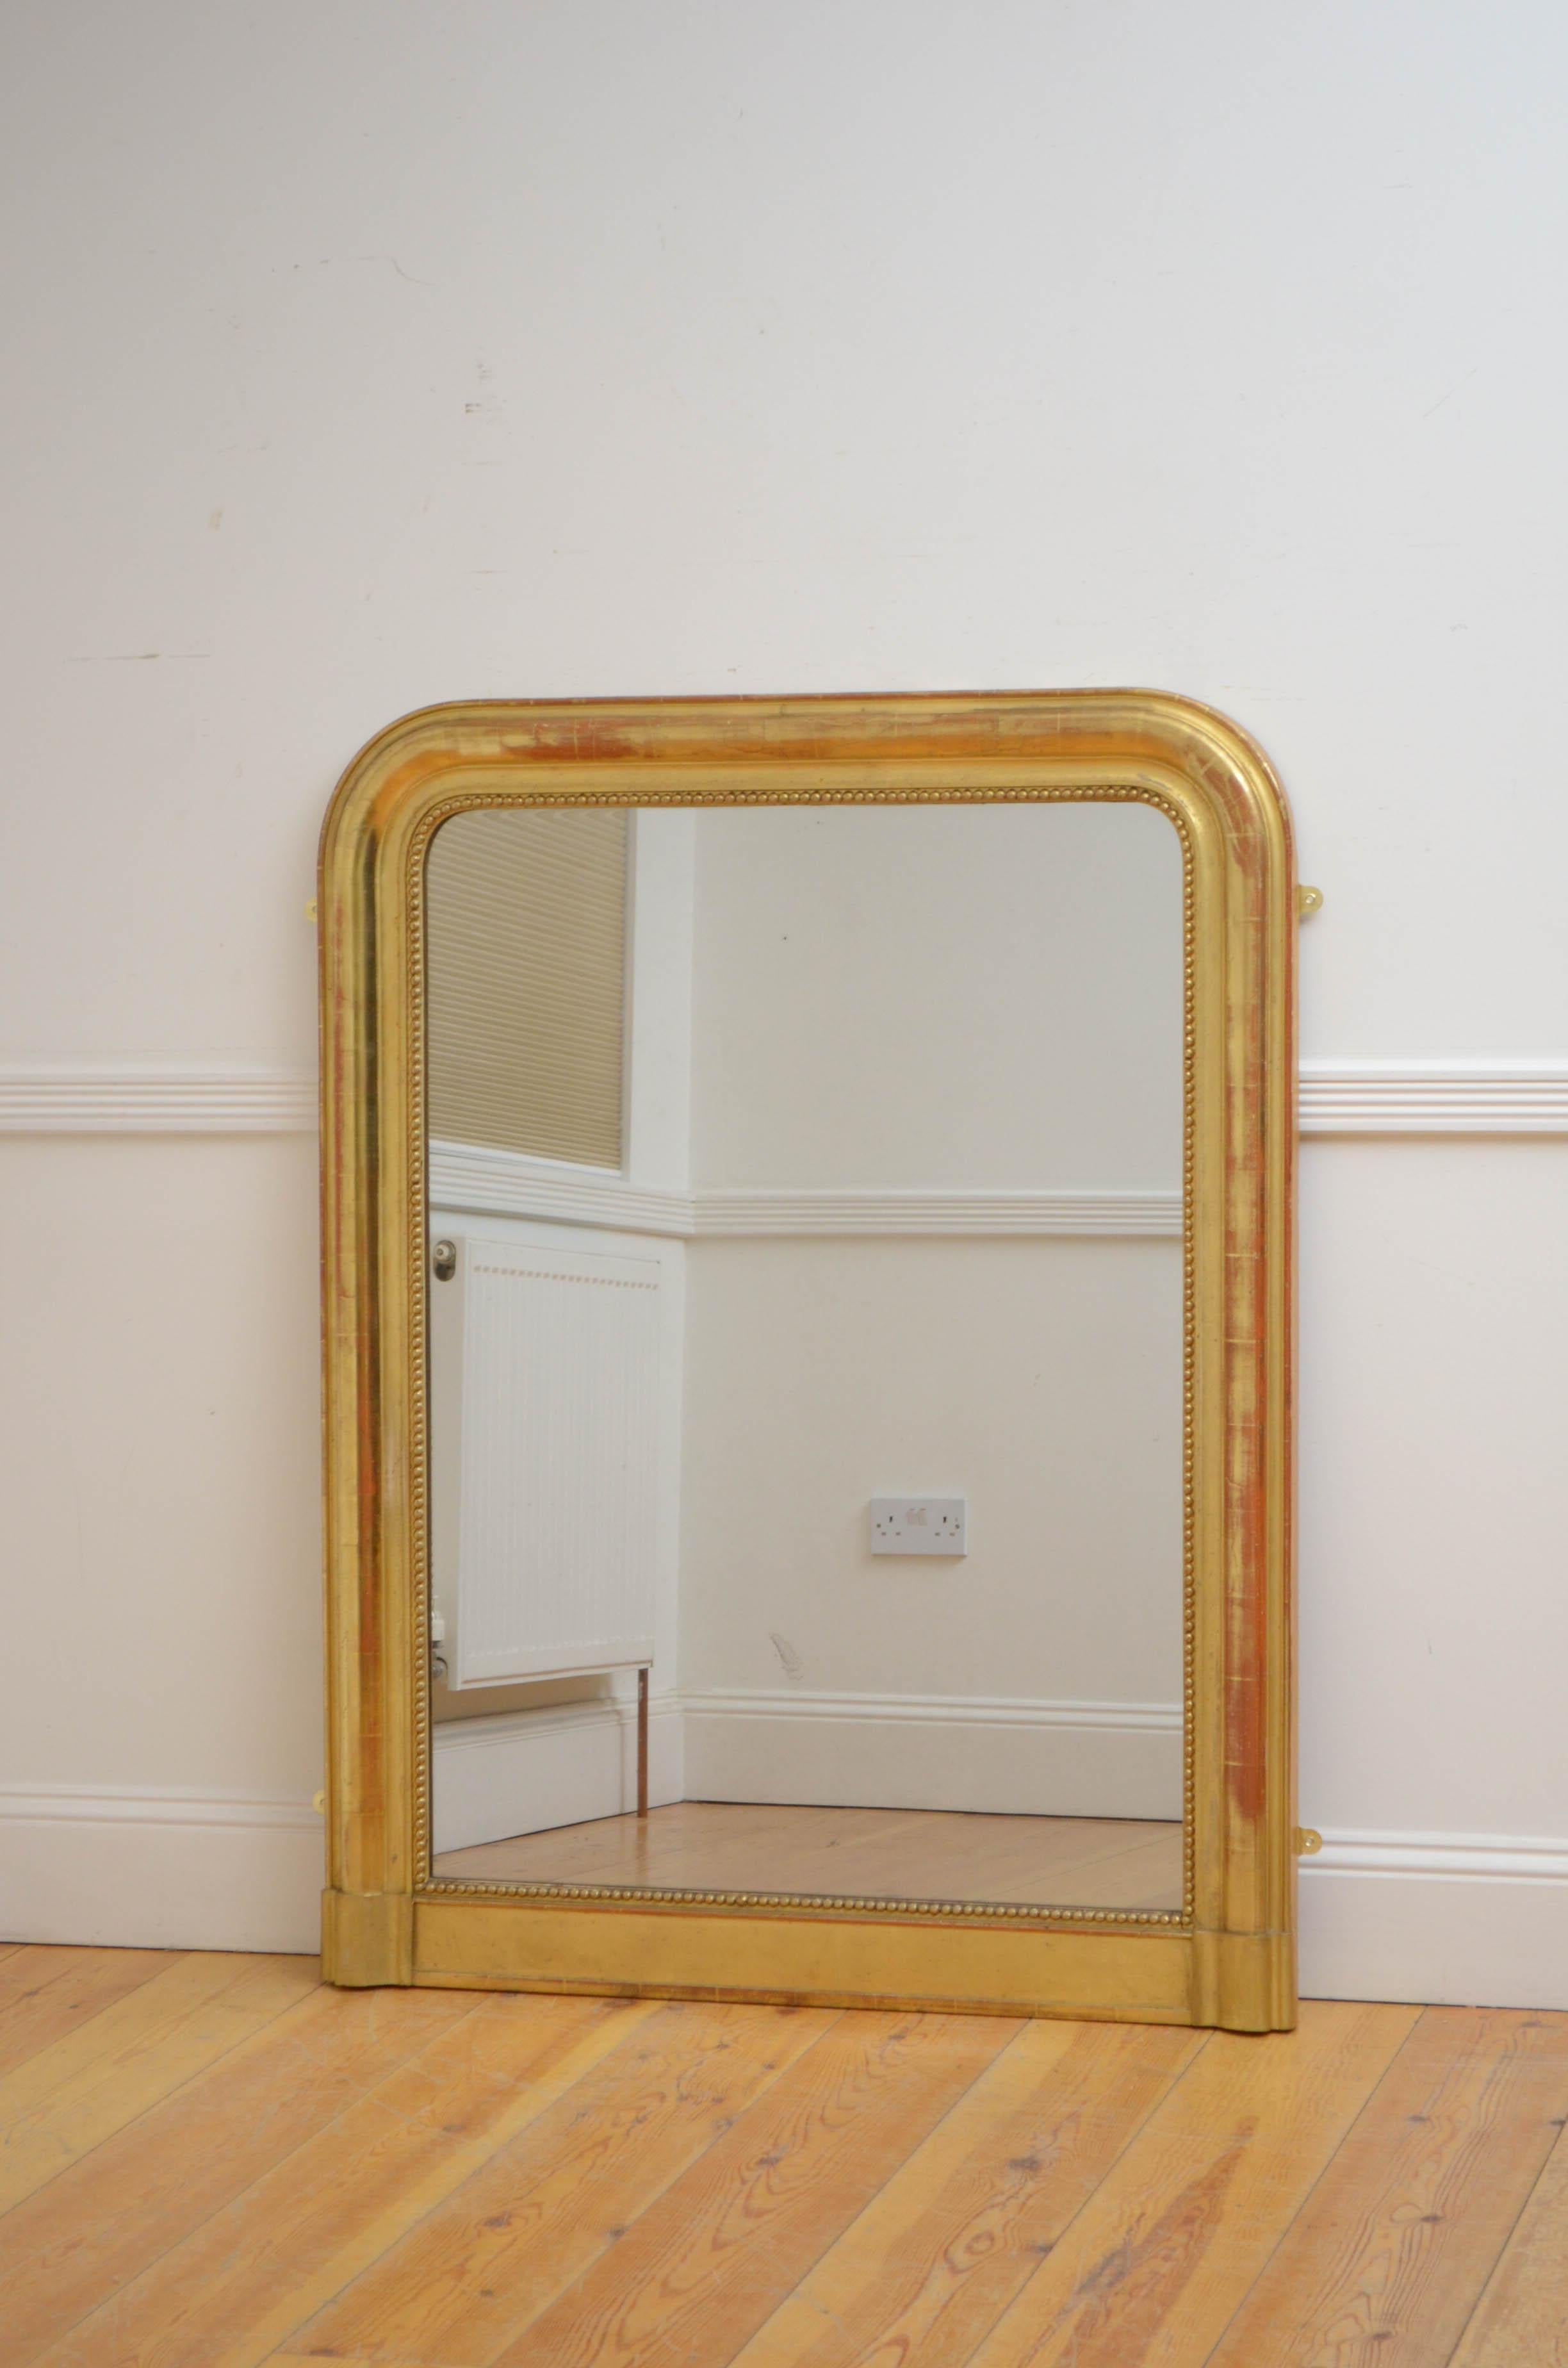 Sn5209 Fine 19th century gilded wall mirror with original foxed glass in beaded and cushion moulded gilt frame. This antique mirror retains its original glass, original gilt and original backboards, all in home ready condition. c1840

H51.5